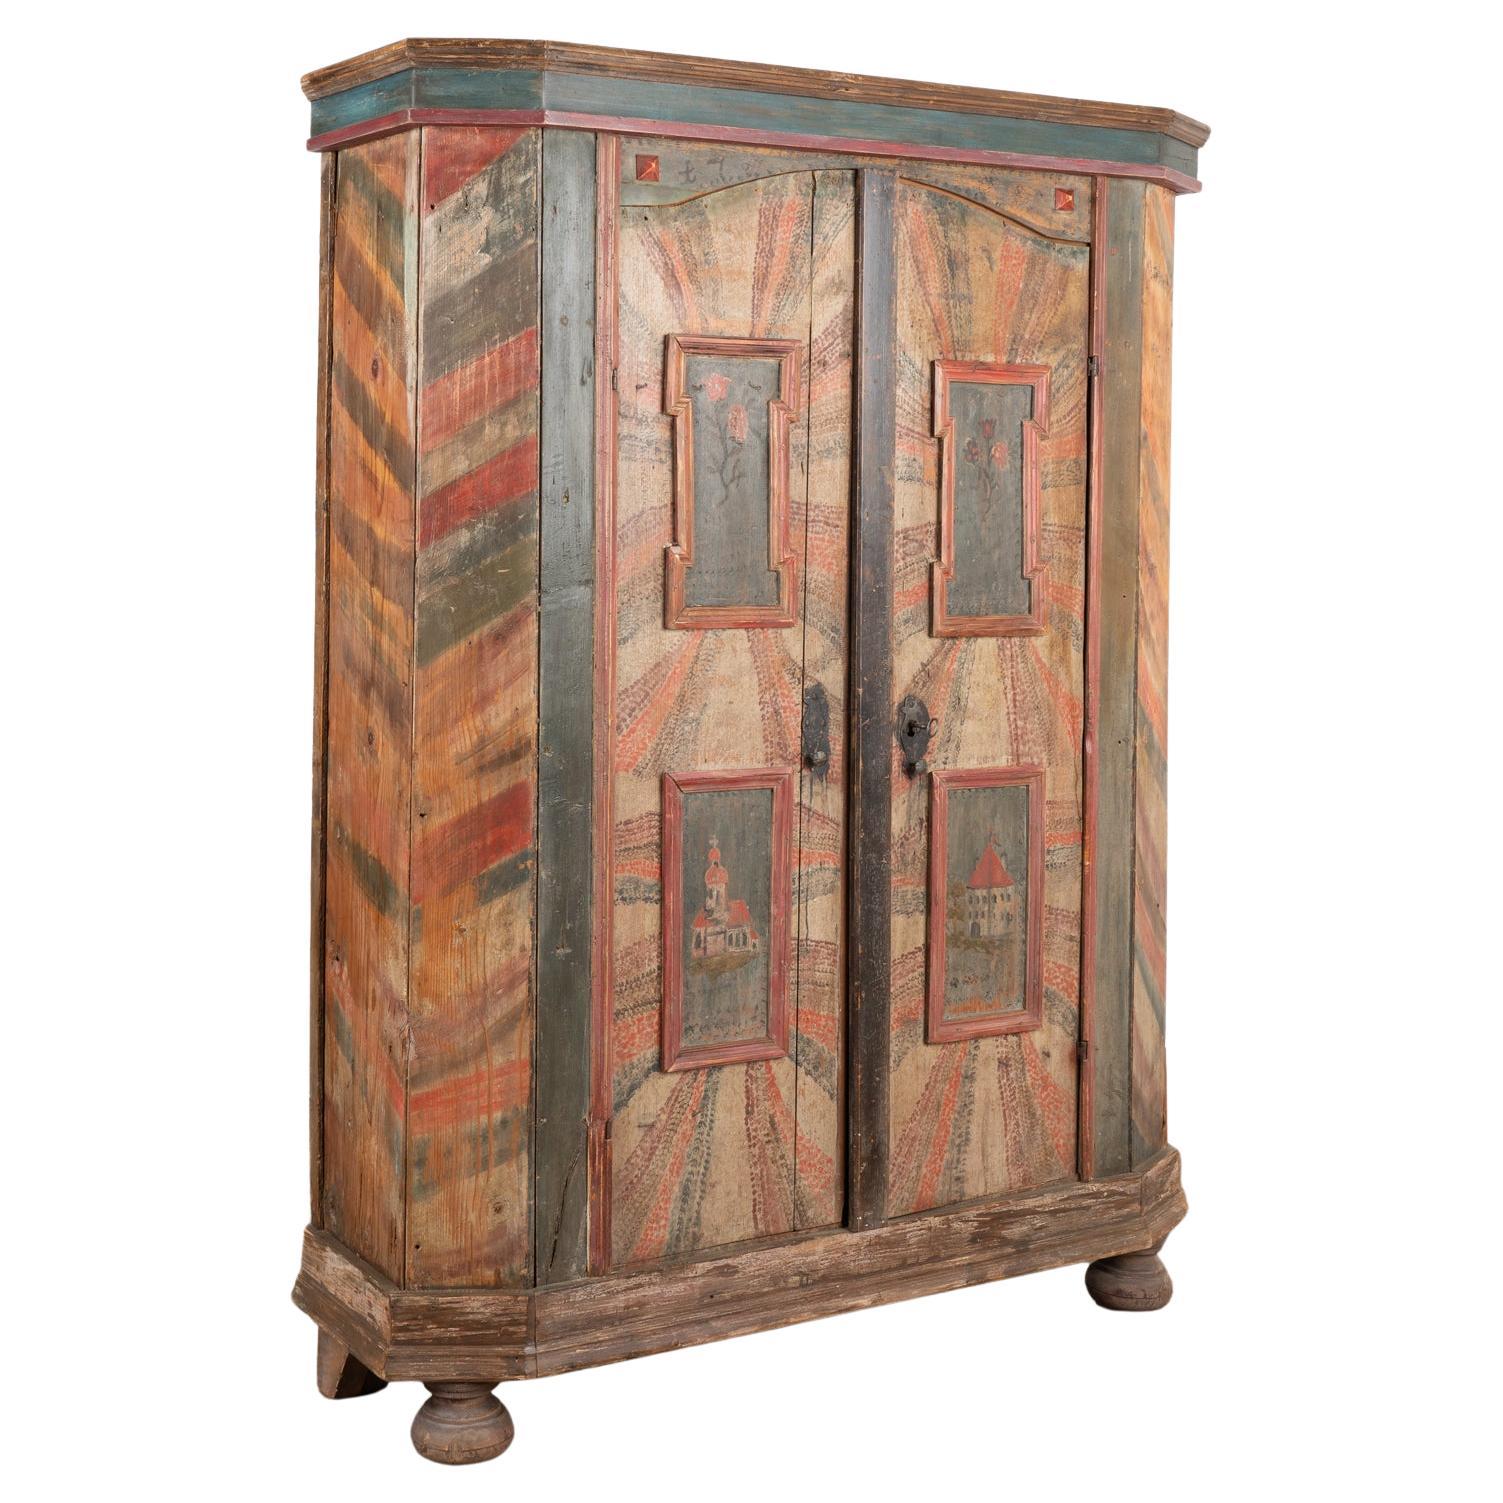 Original Hand Painted Armoire, Hungary dated 1785